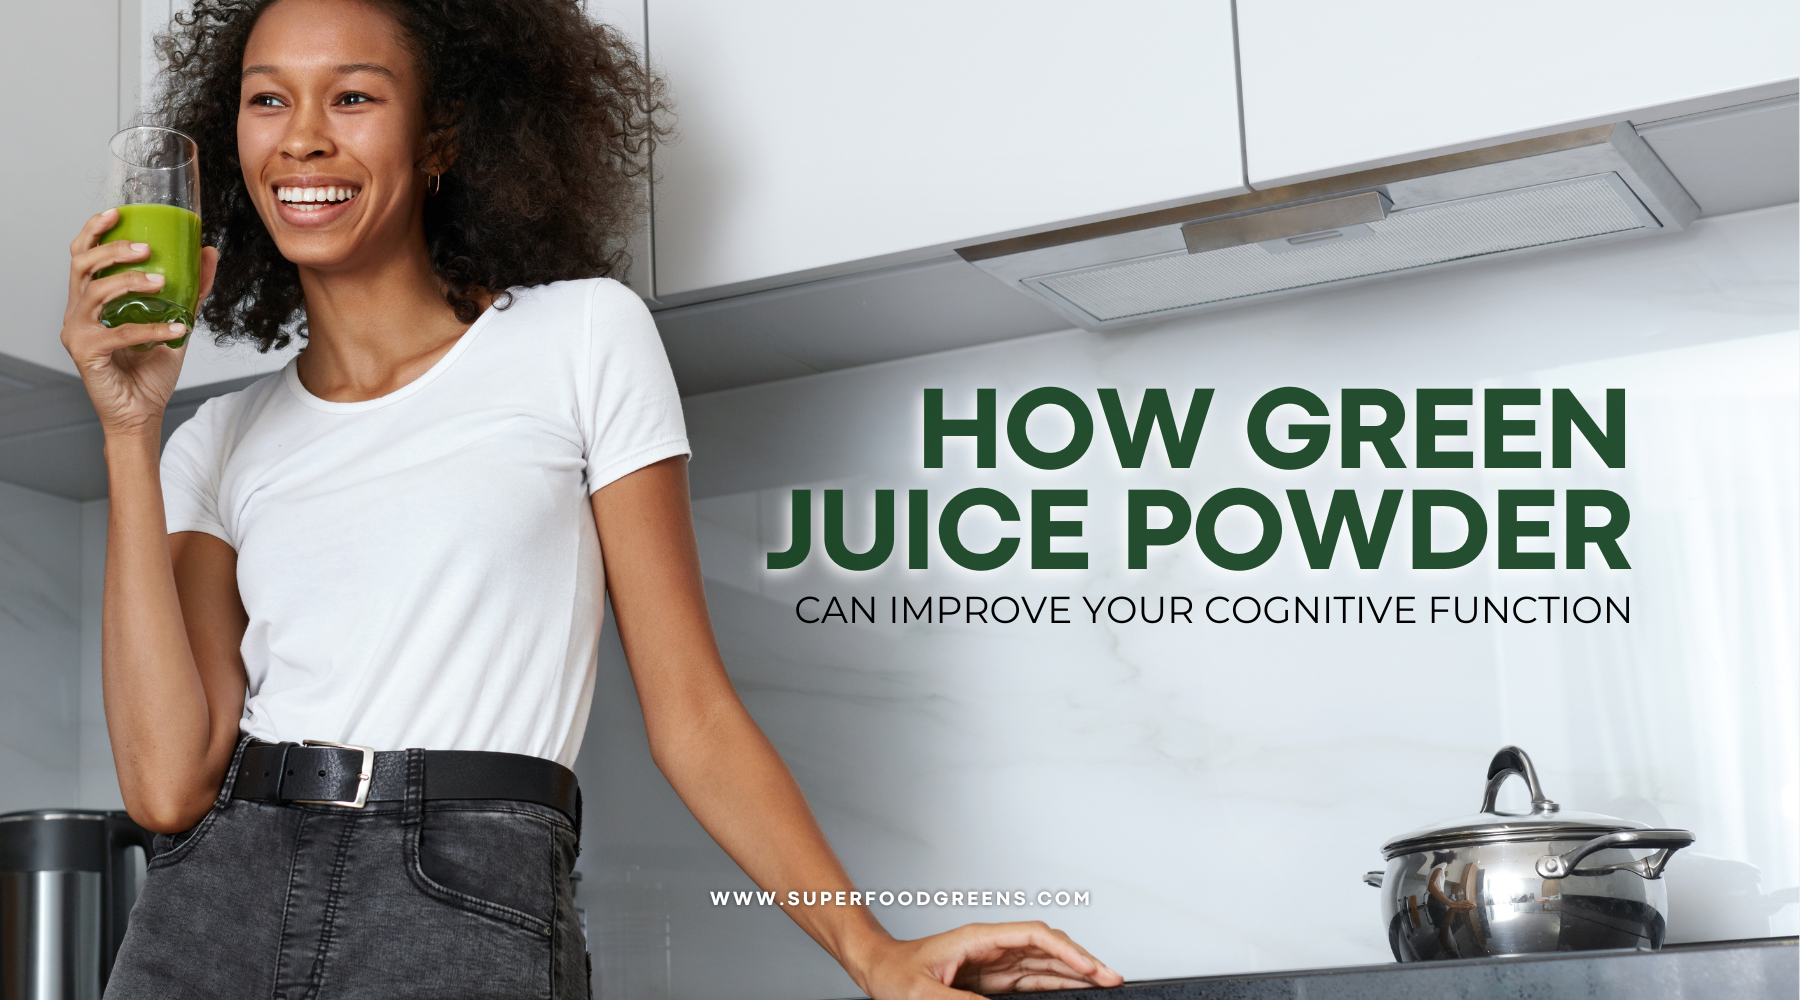  How Green Juice Powders Can Improve Your Cognitive Function | Superfoodgreens